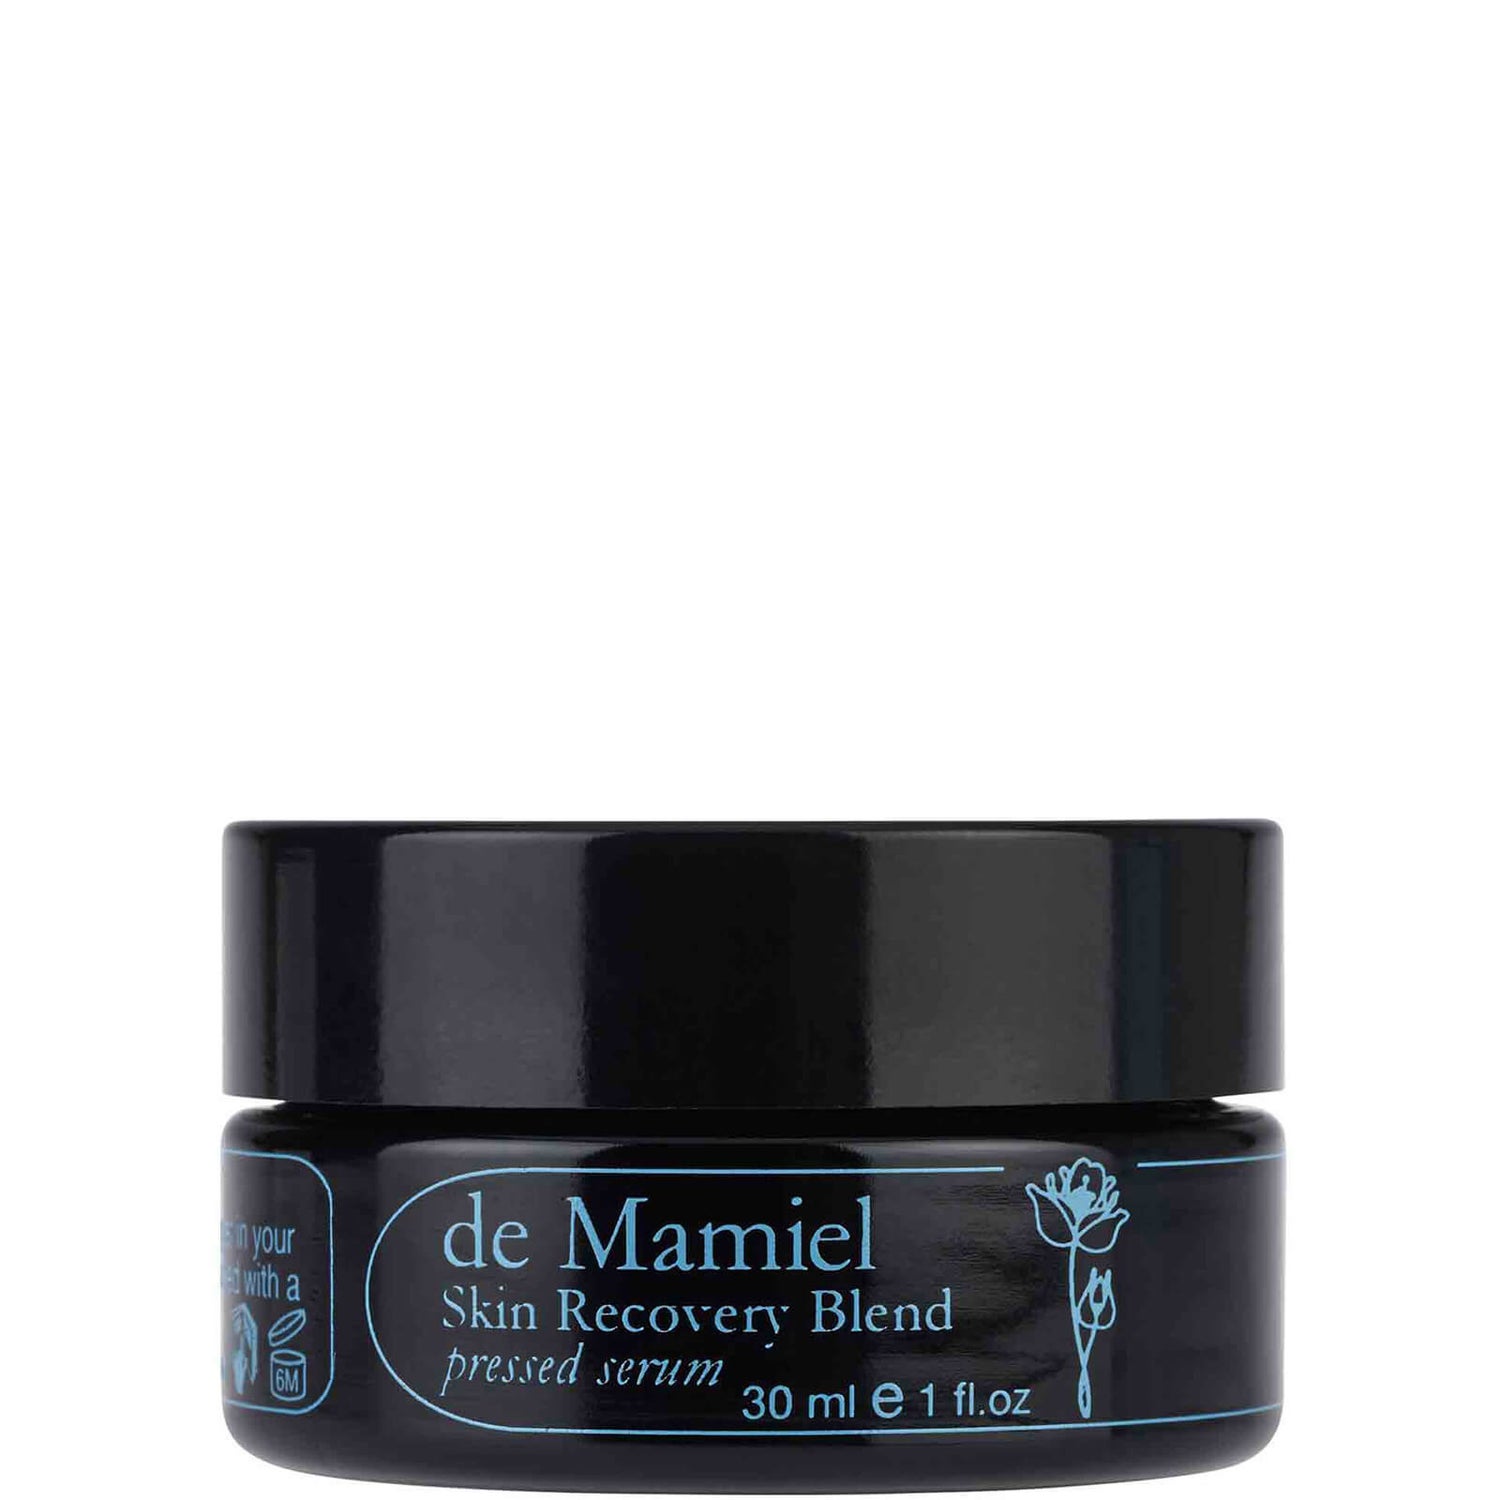 de Mamiel The Skin Recovery Blend